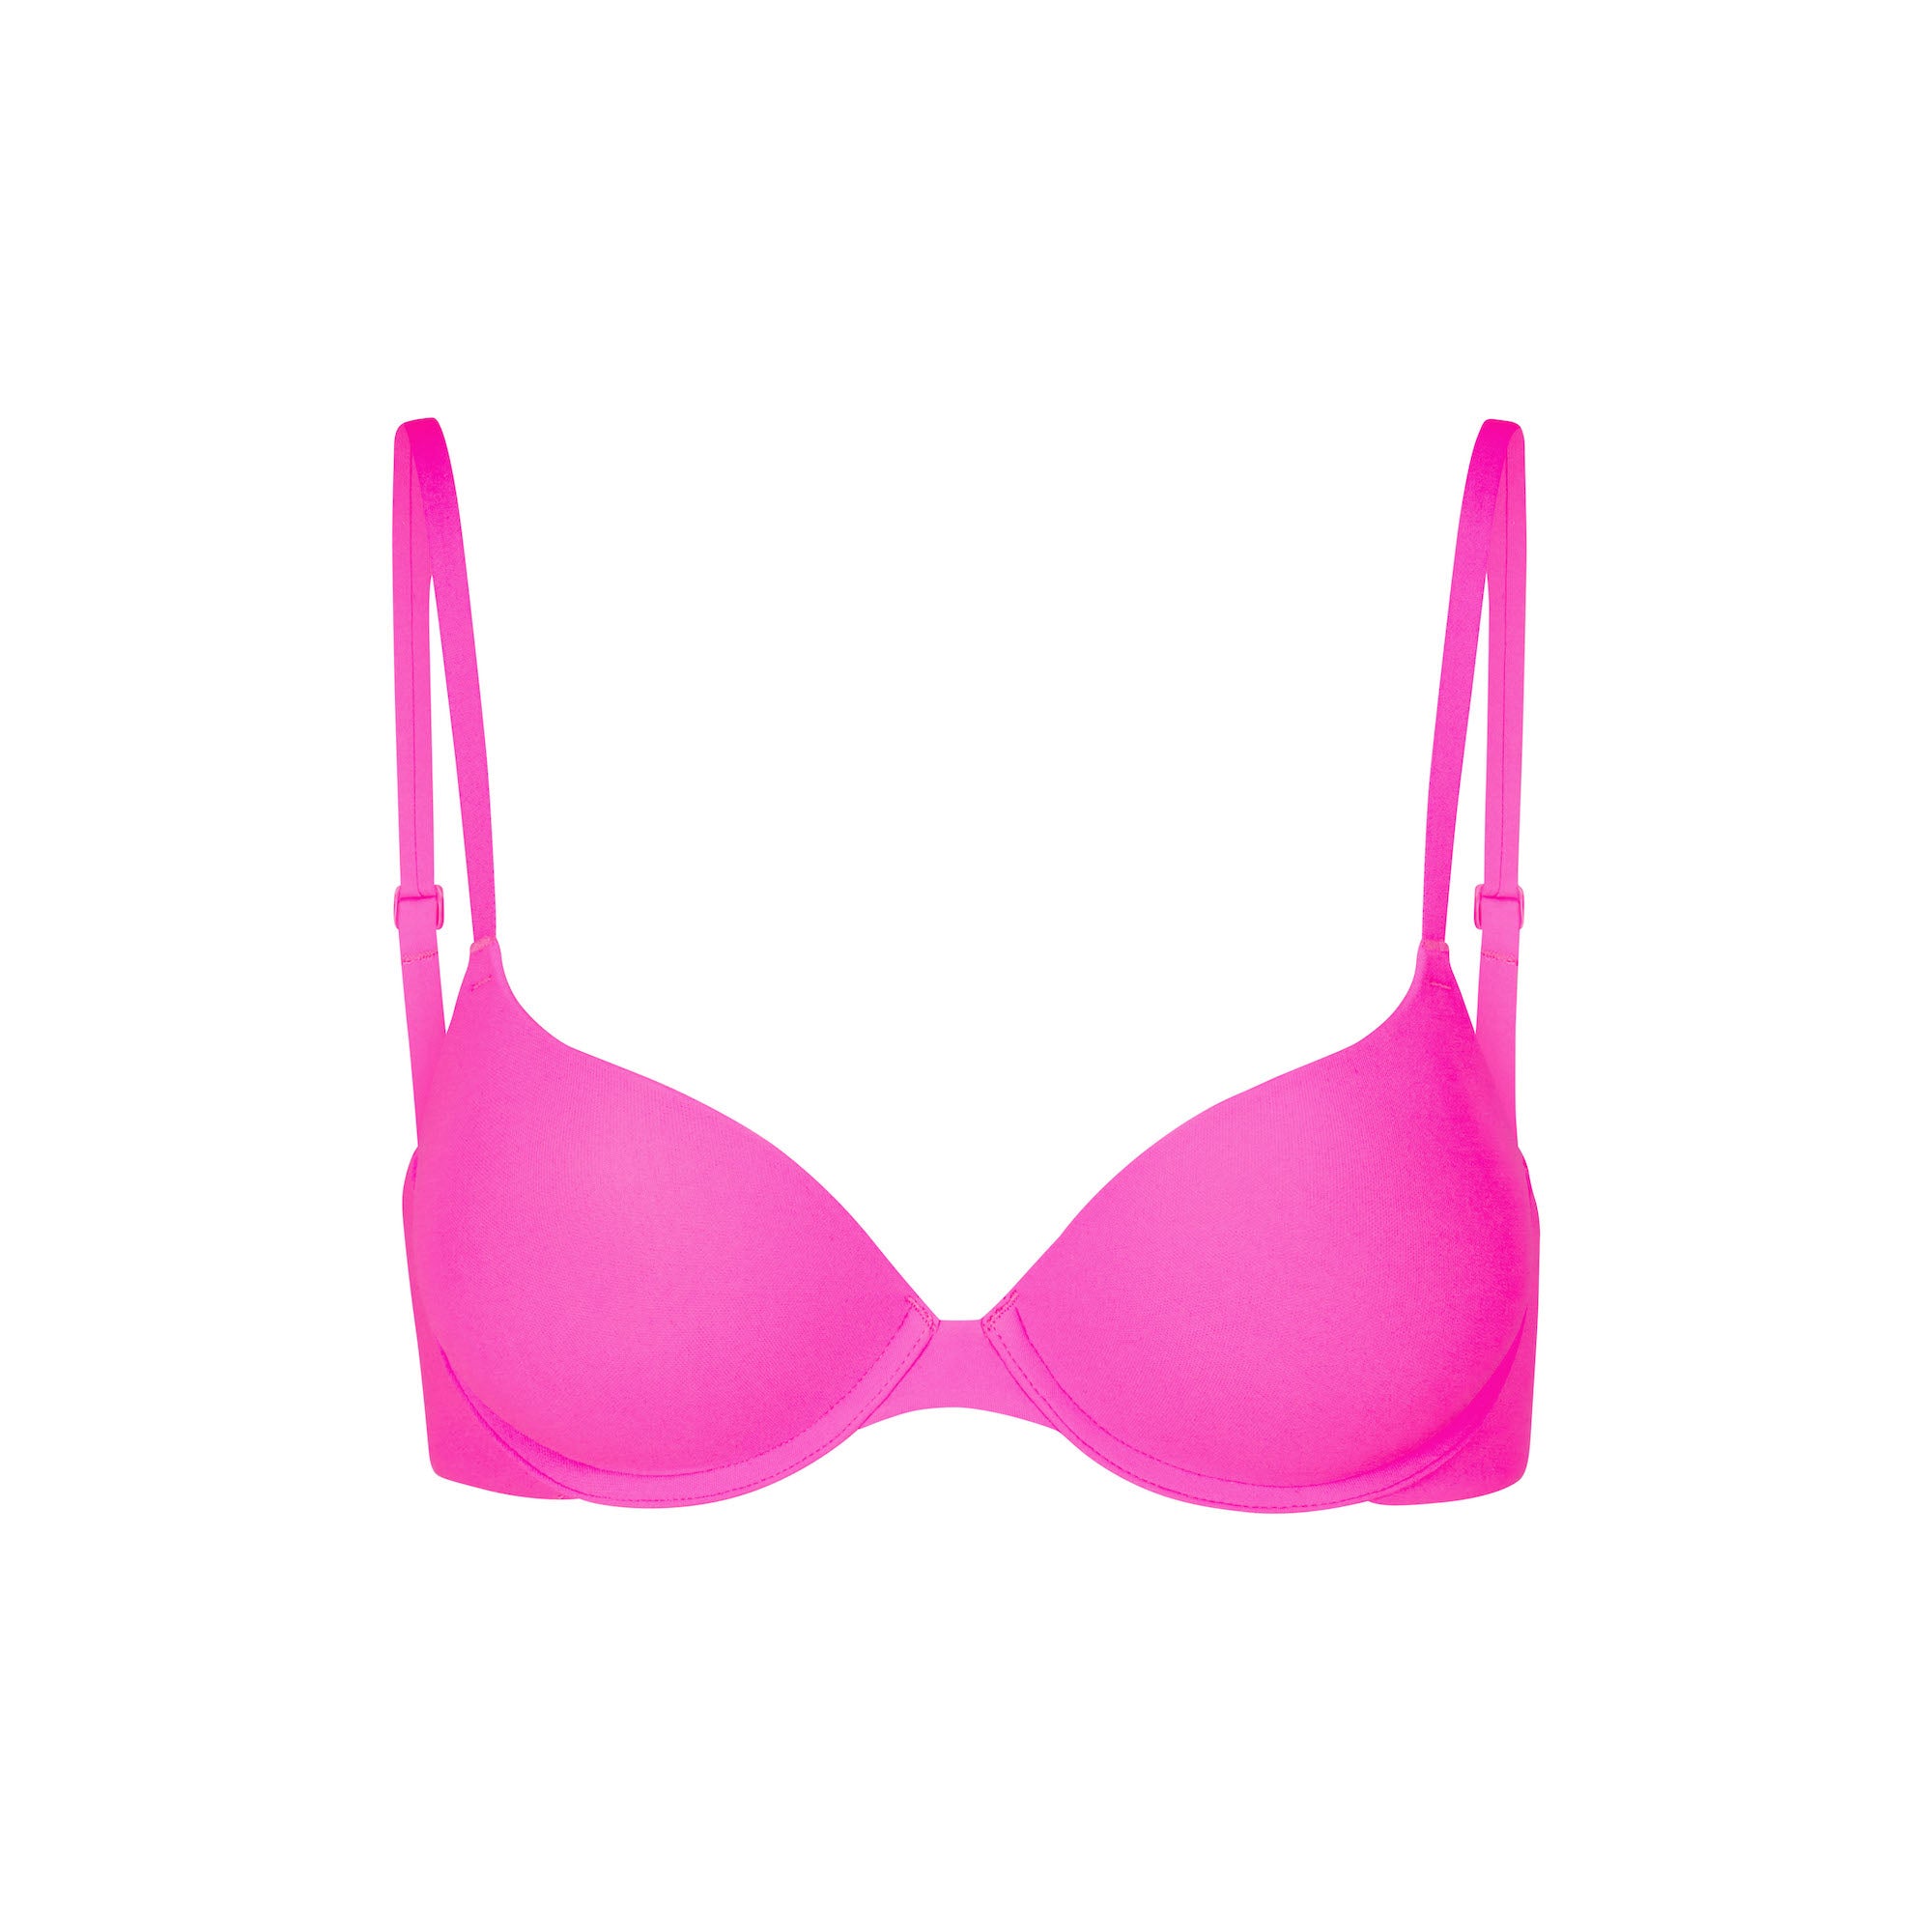 NWT Auden Plunge Coverage Push Up Bra Pink Size undefined - $15 New With  Tags - From Kristine